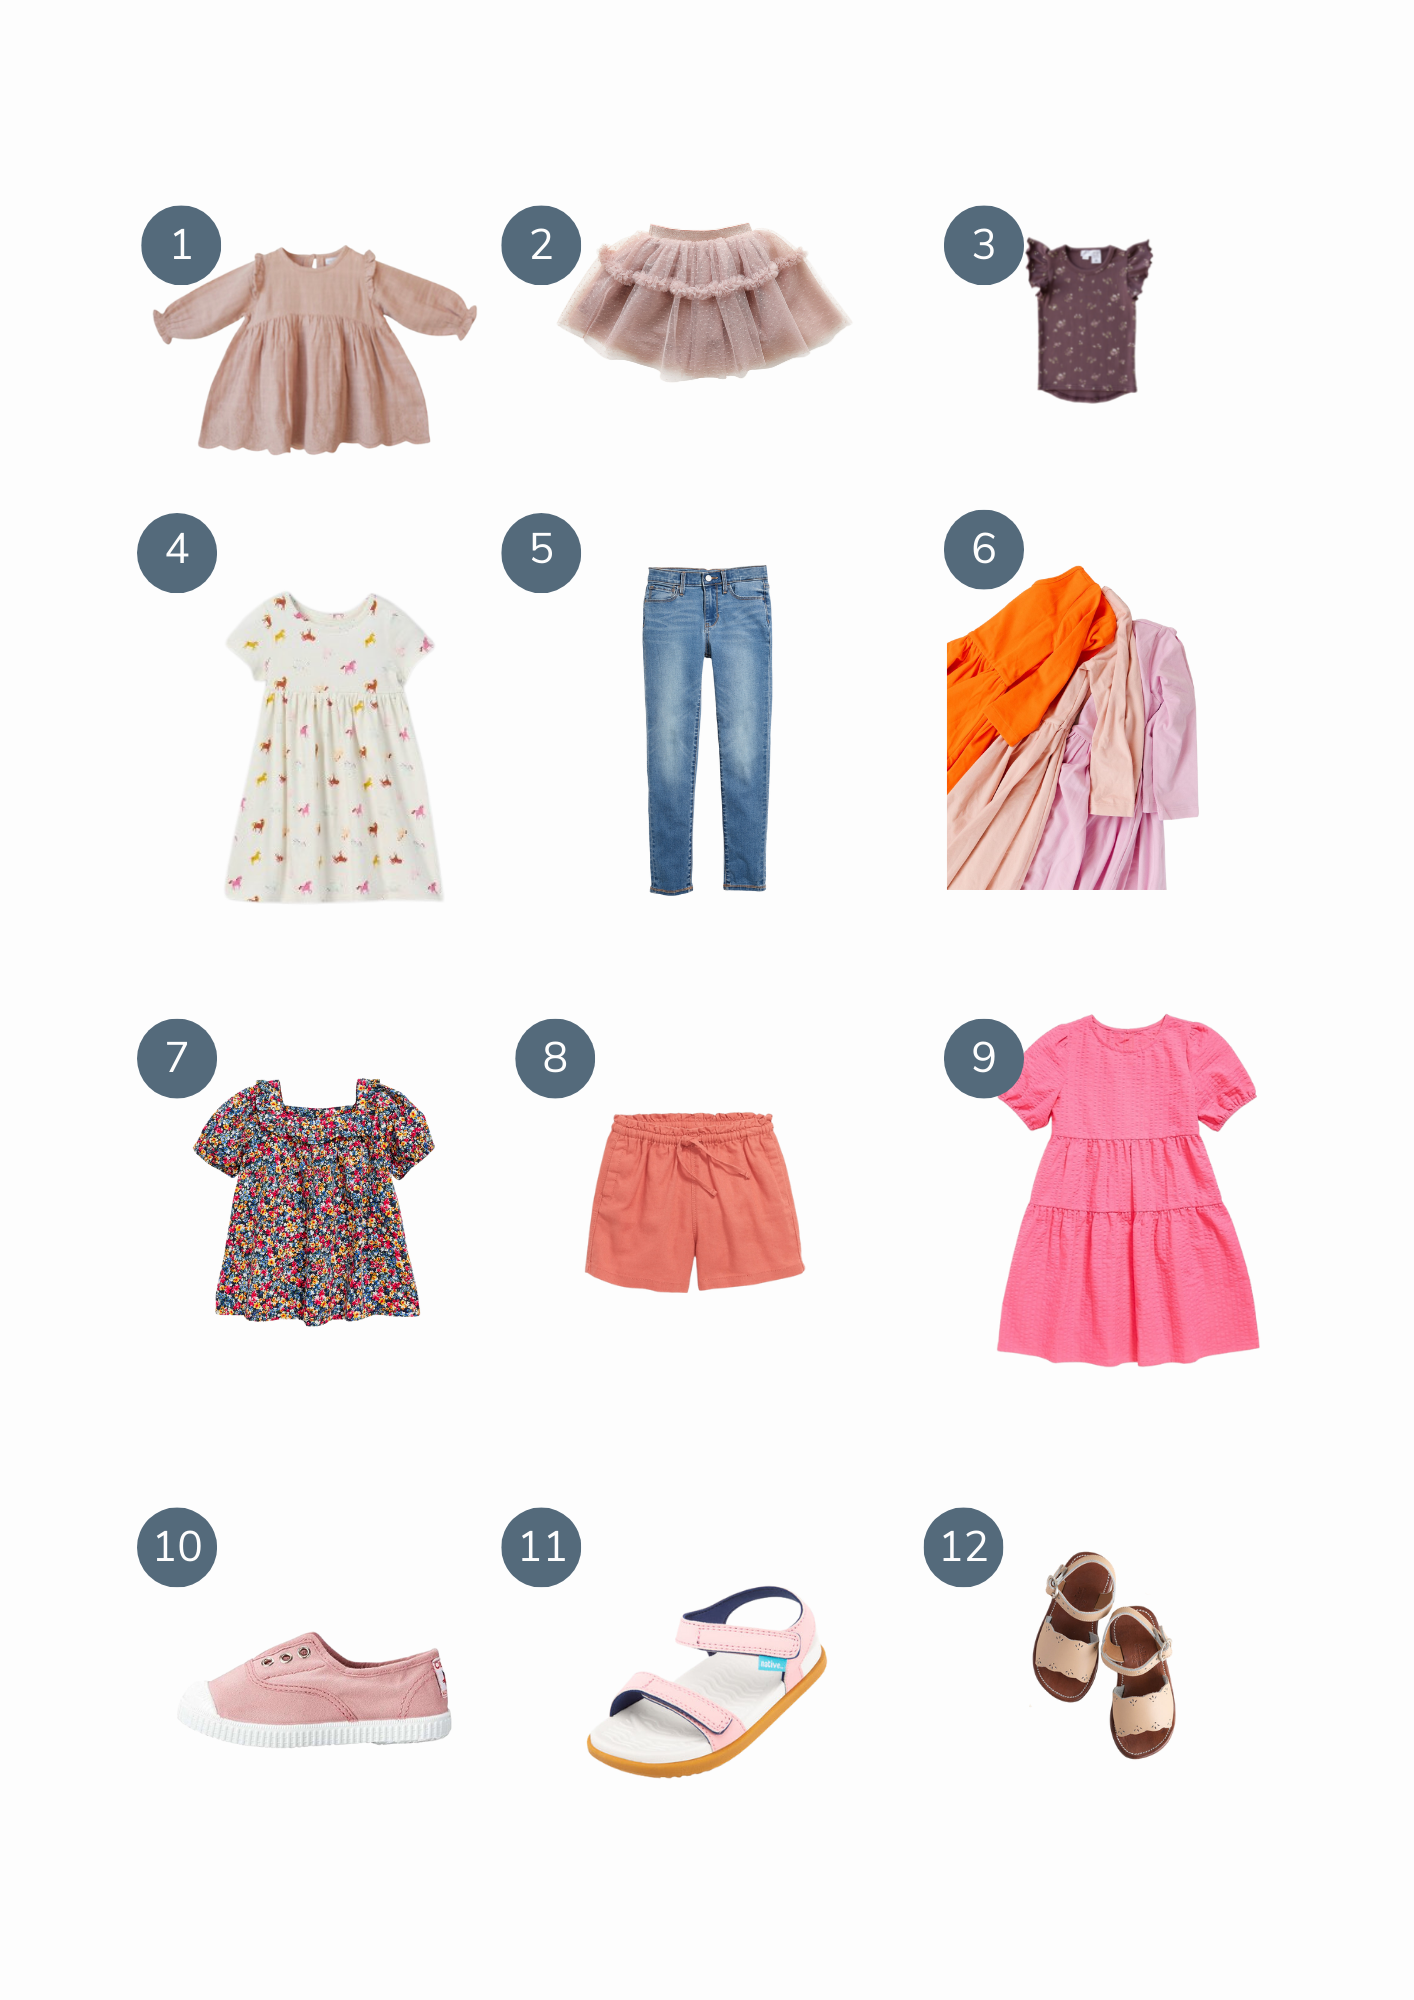 collage of bright colored clothing and shoes for little girls